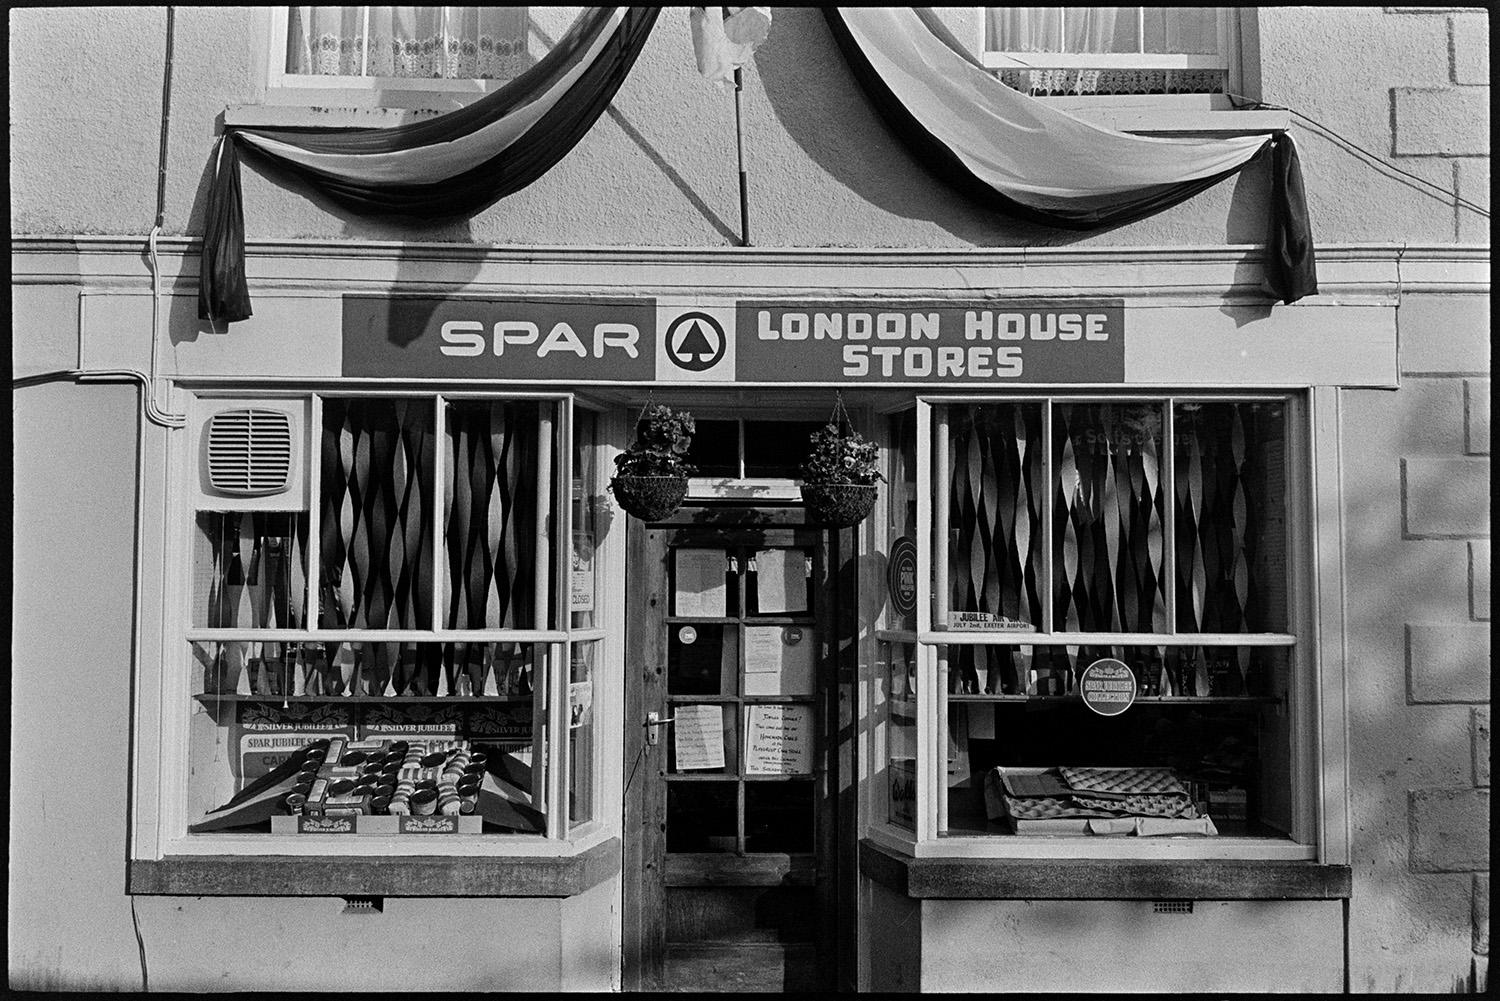 Village stores decorated with pattern of tins, for Jubilee. 
[The shop front window of London House Stores or Spar in Dolton. It is decorated for Queen Elizabeth II Silver Jubilee with the letters 'E R' spelt out in a display of tins and bags of flour. Hanging baskets are also above the shop door.]